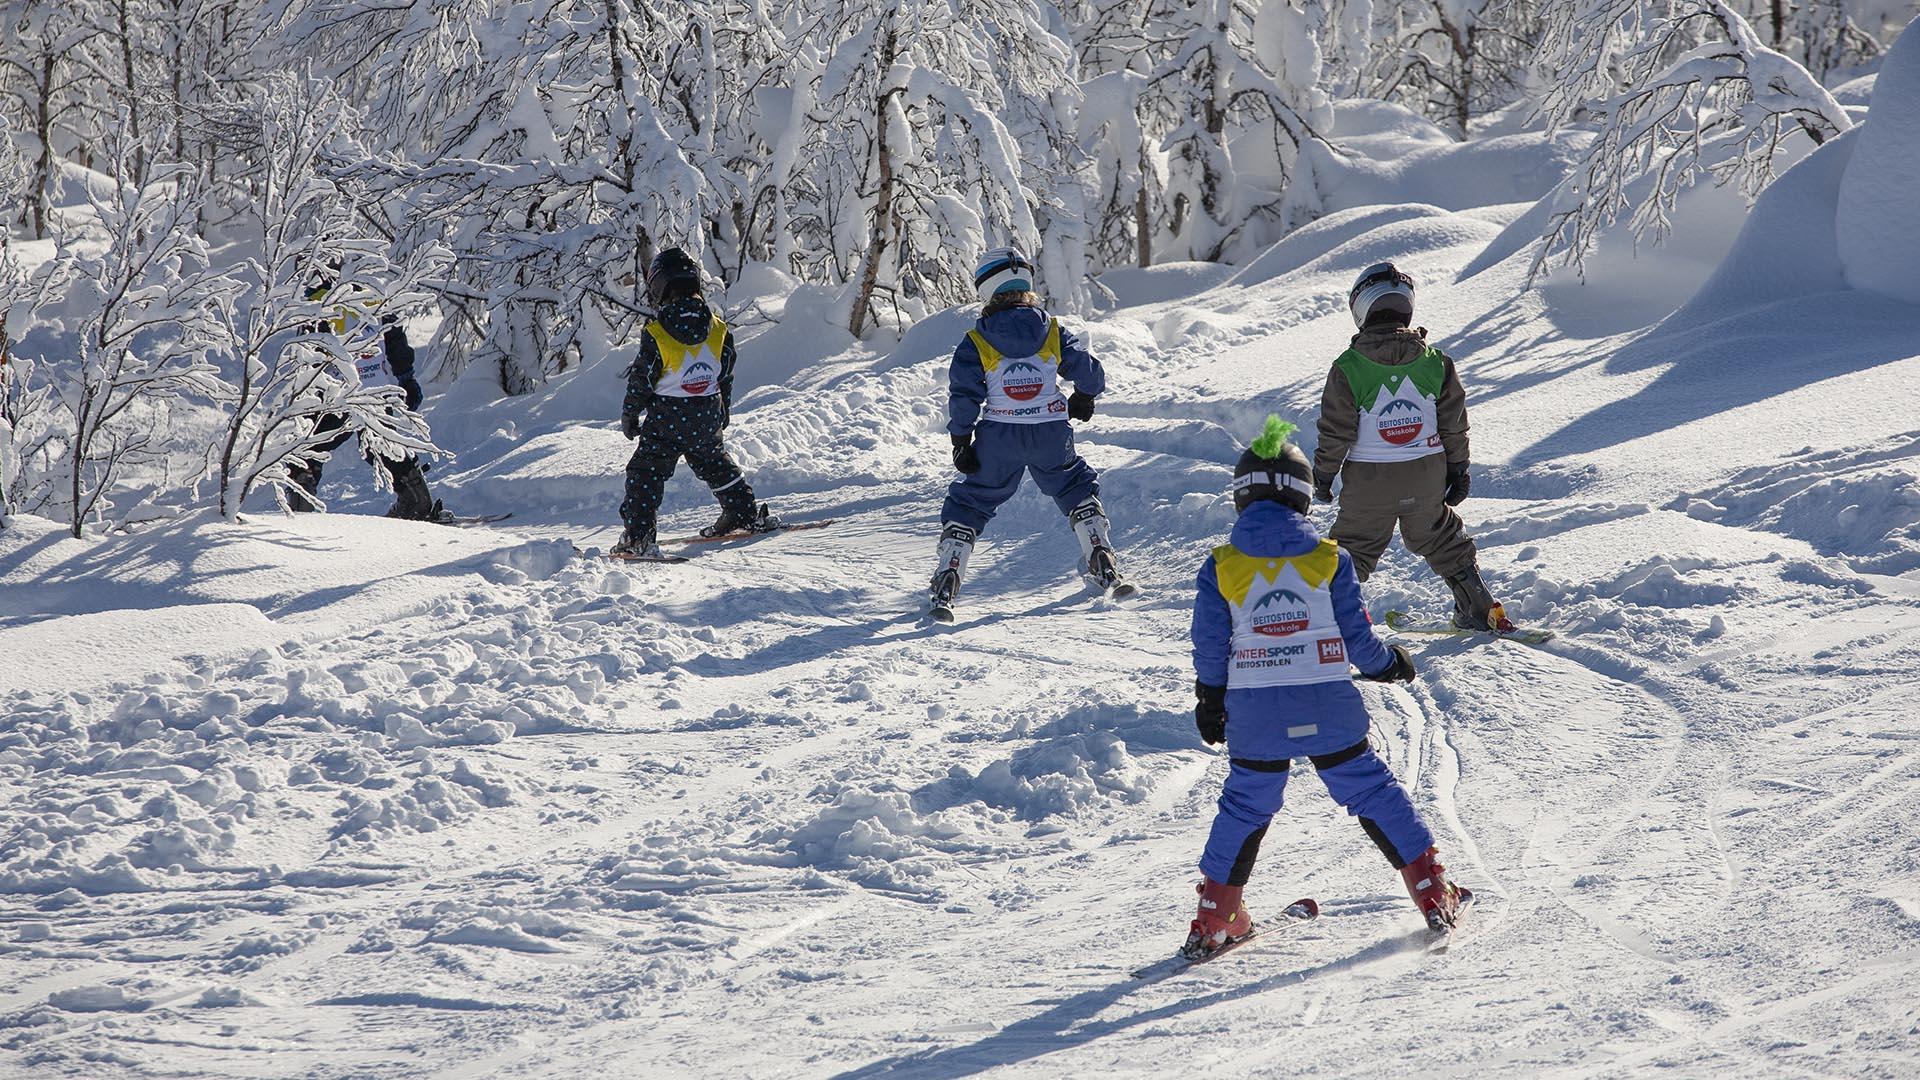 A group of children with ski school vests skiing a forest slope